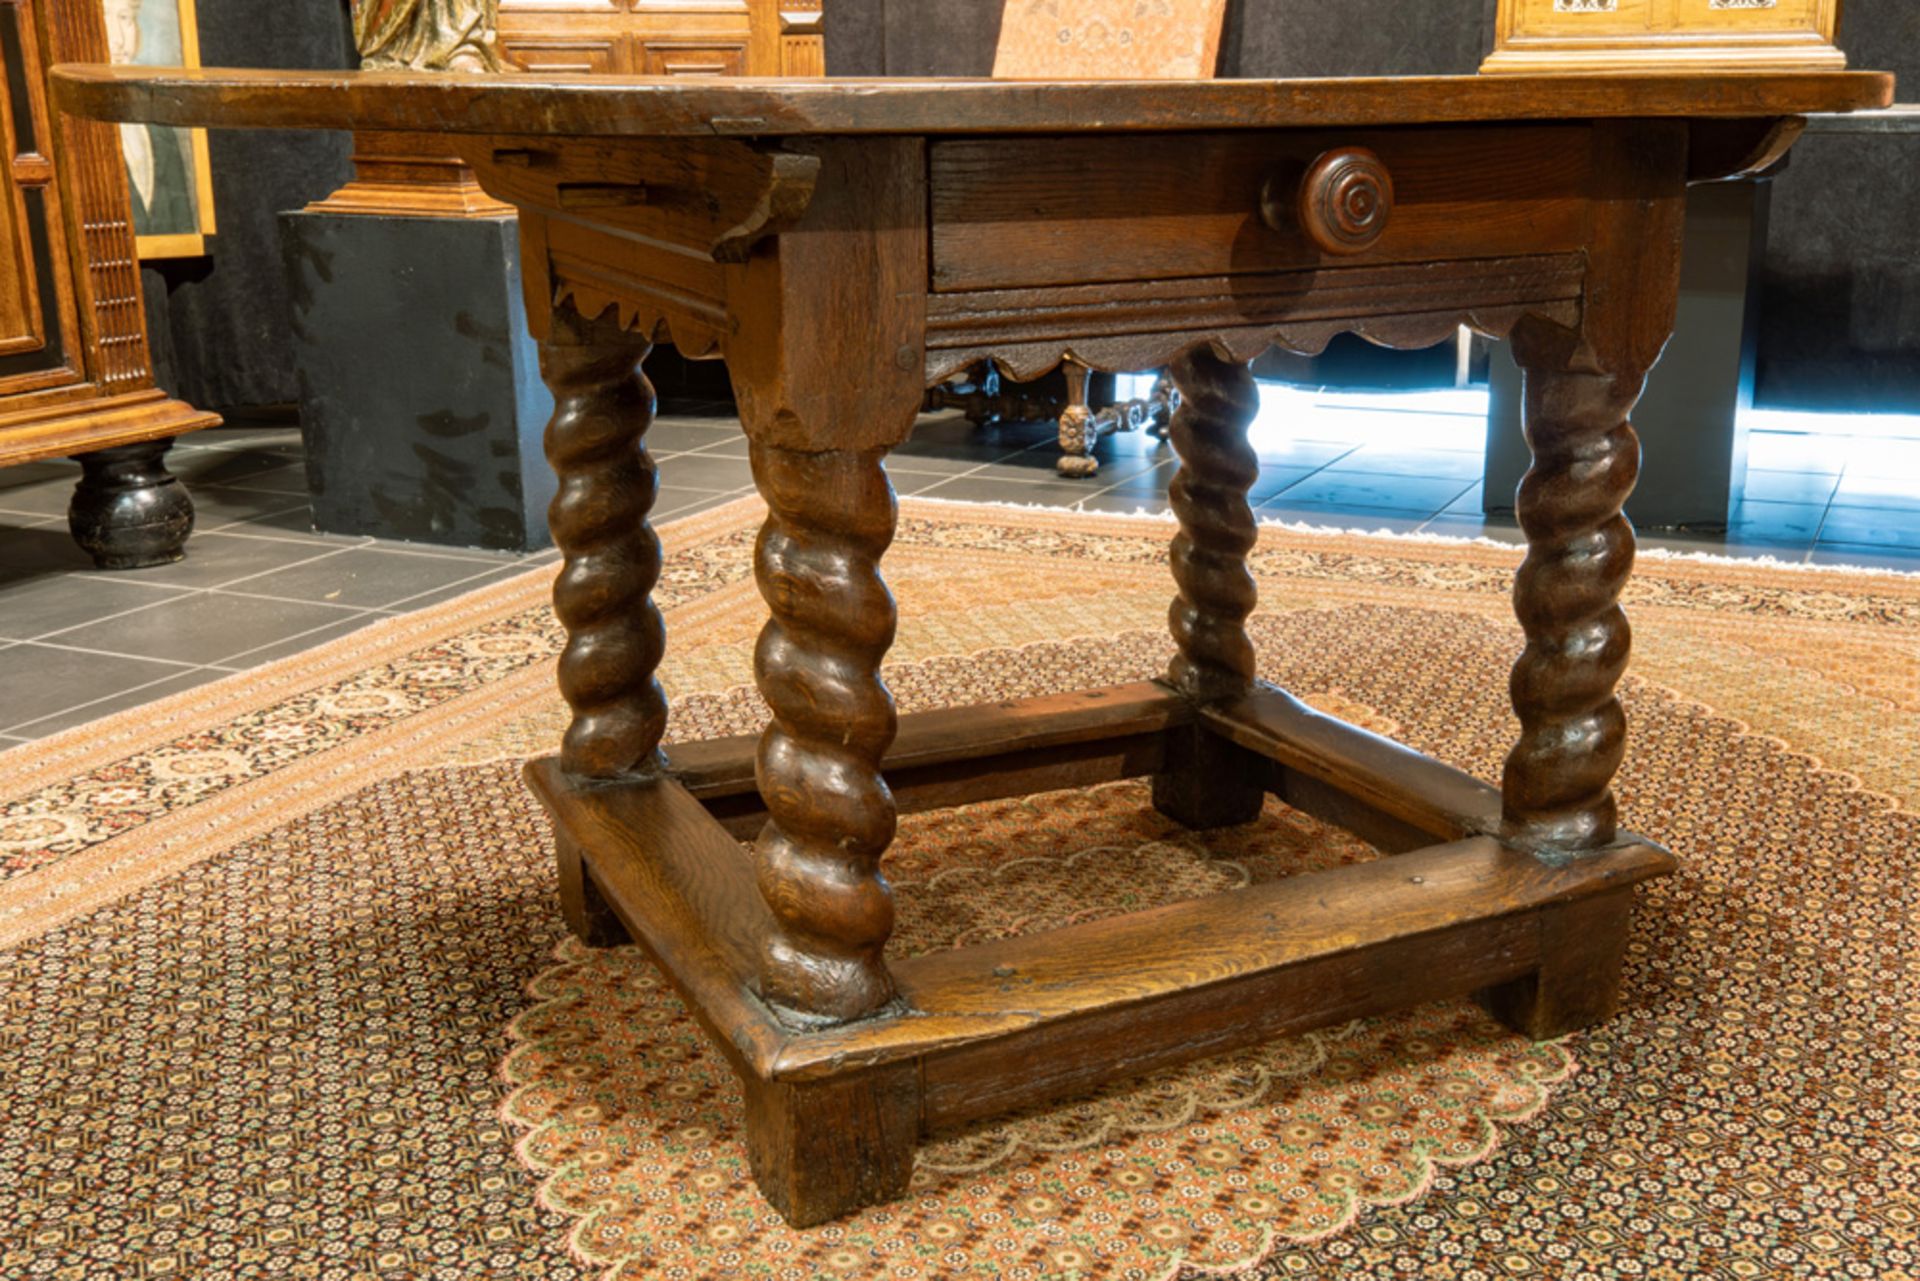 17th/18th Cent. Flemish oak table with oval top and drawer || Zeventiende/achttiende eeuwse - Image 3 of 3